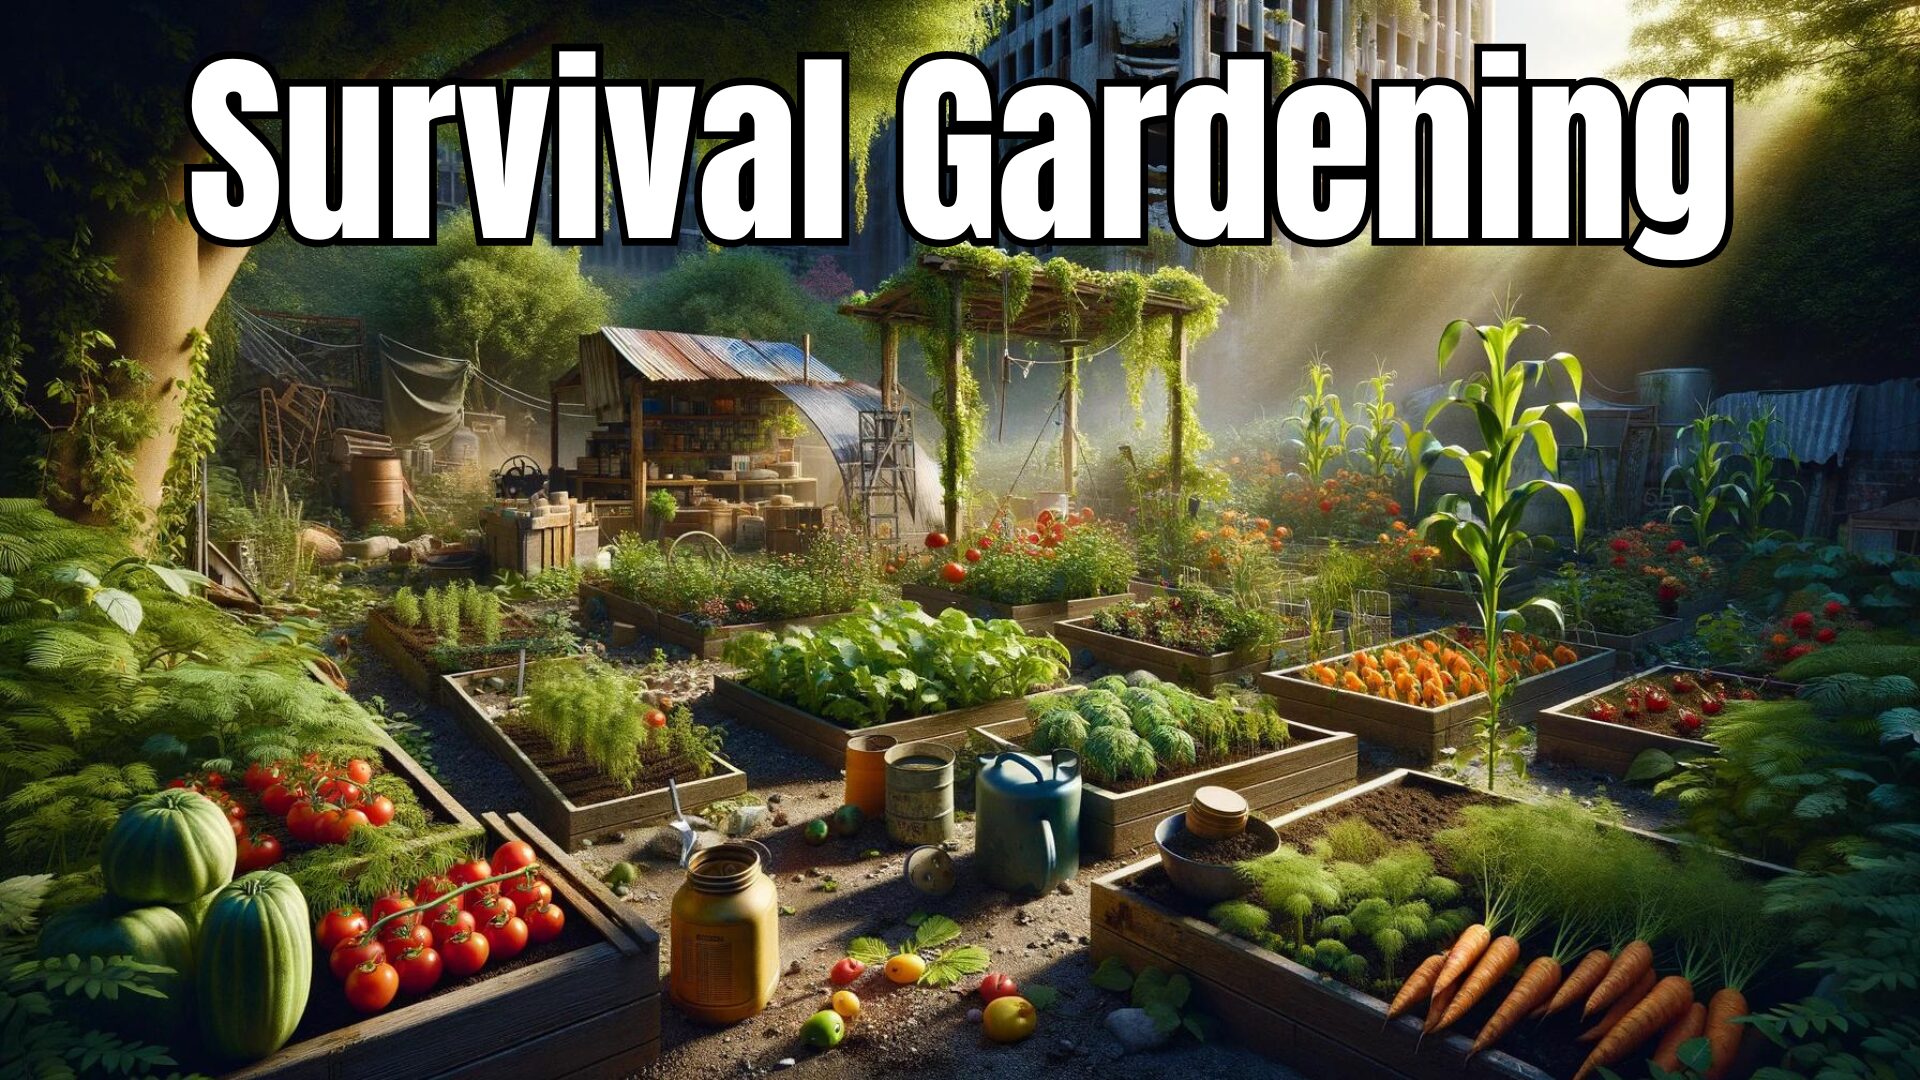 You are currently viewing Survival Gardening: Crops & Tips to Grow a Survival Garden